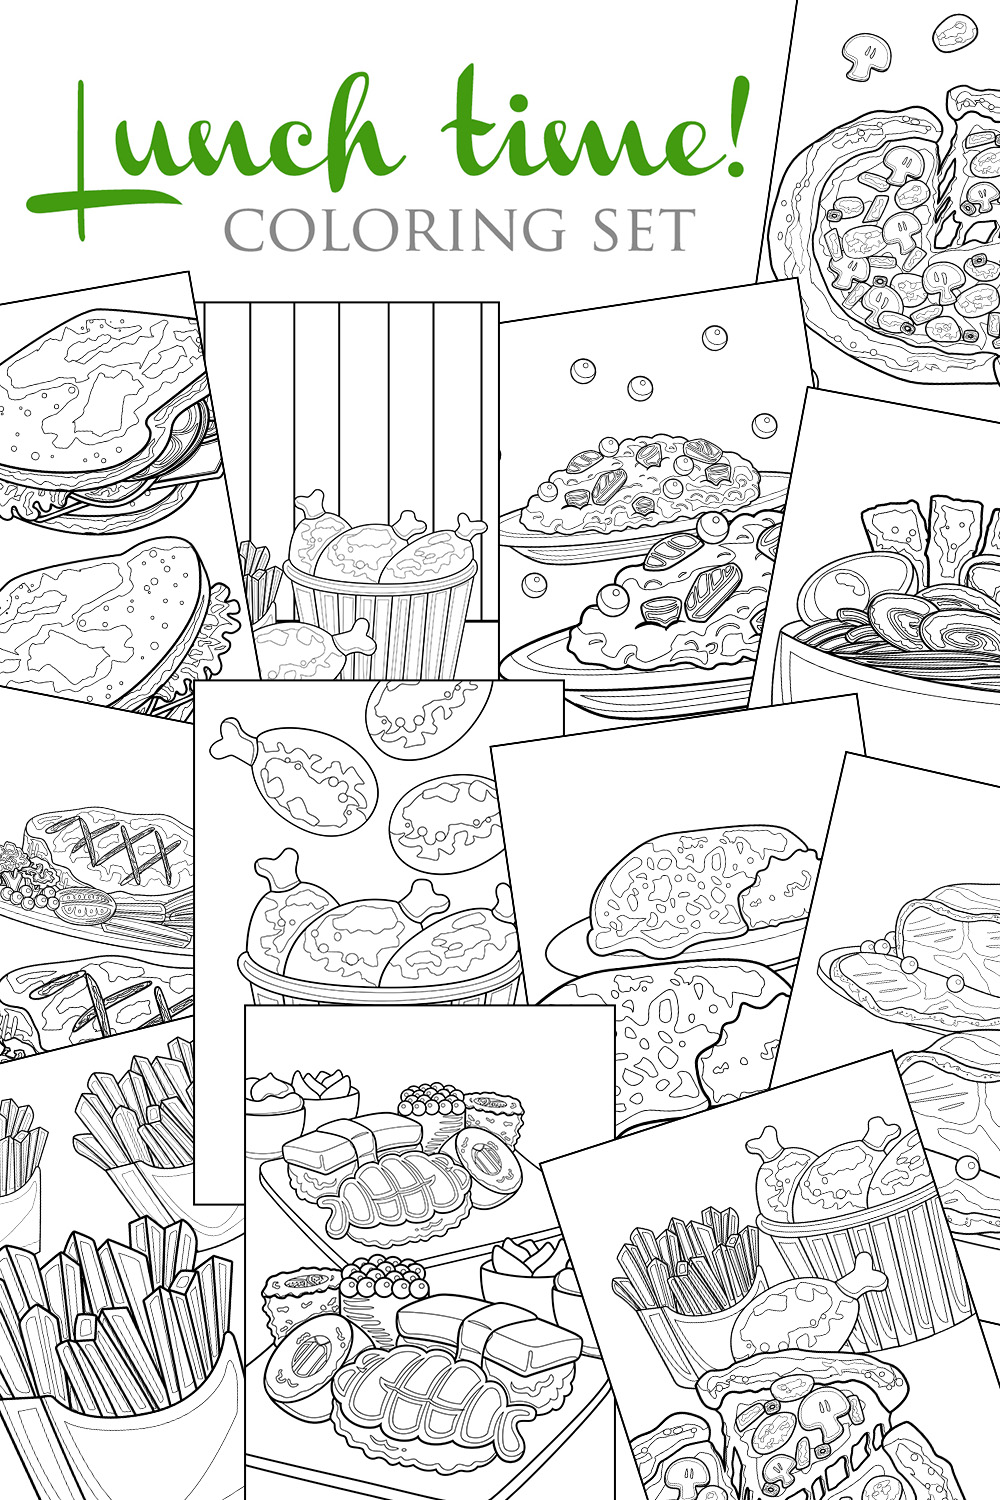 Delicious Lunch Time Like Pizza Noodle Ramen Sushi Junk Food Steak Sandwich Curry Rice Coloring Pages for Kids and Adult pinterest preview image.